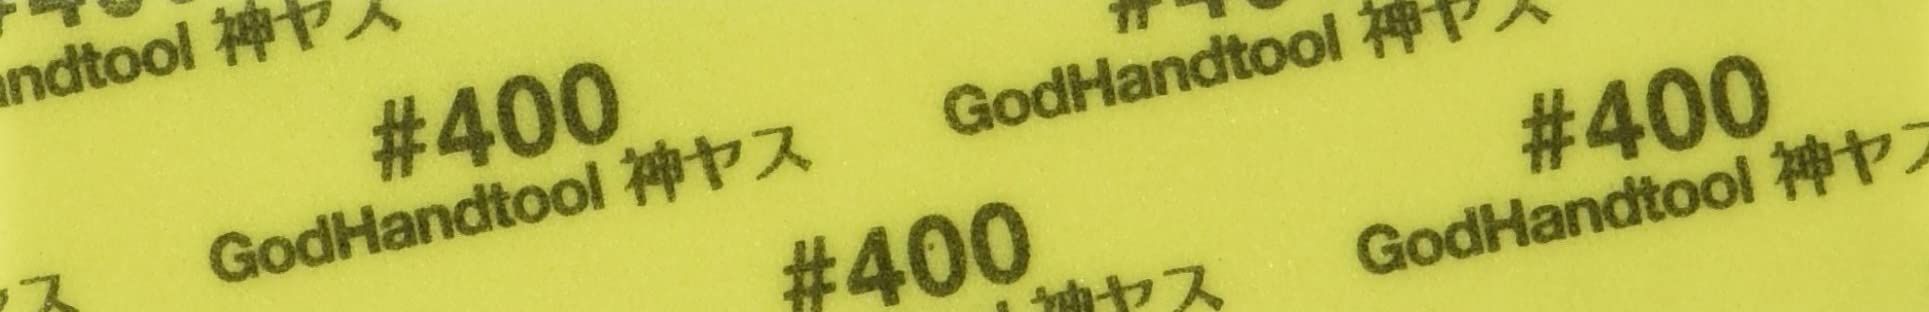 Godhand God File! Sponge Cloth File 2Mm Thick Approx. 105 X 20Mm #400 5 Pieces Gh-Ks2-P400